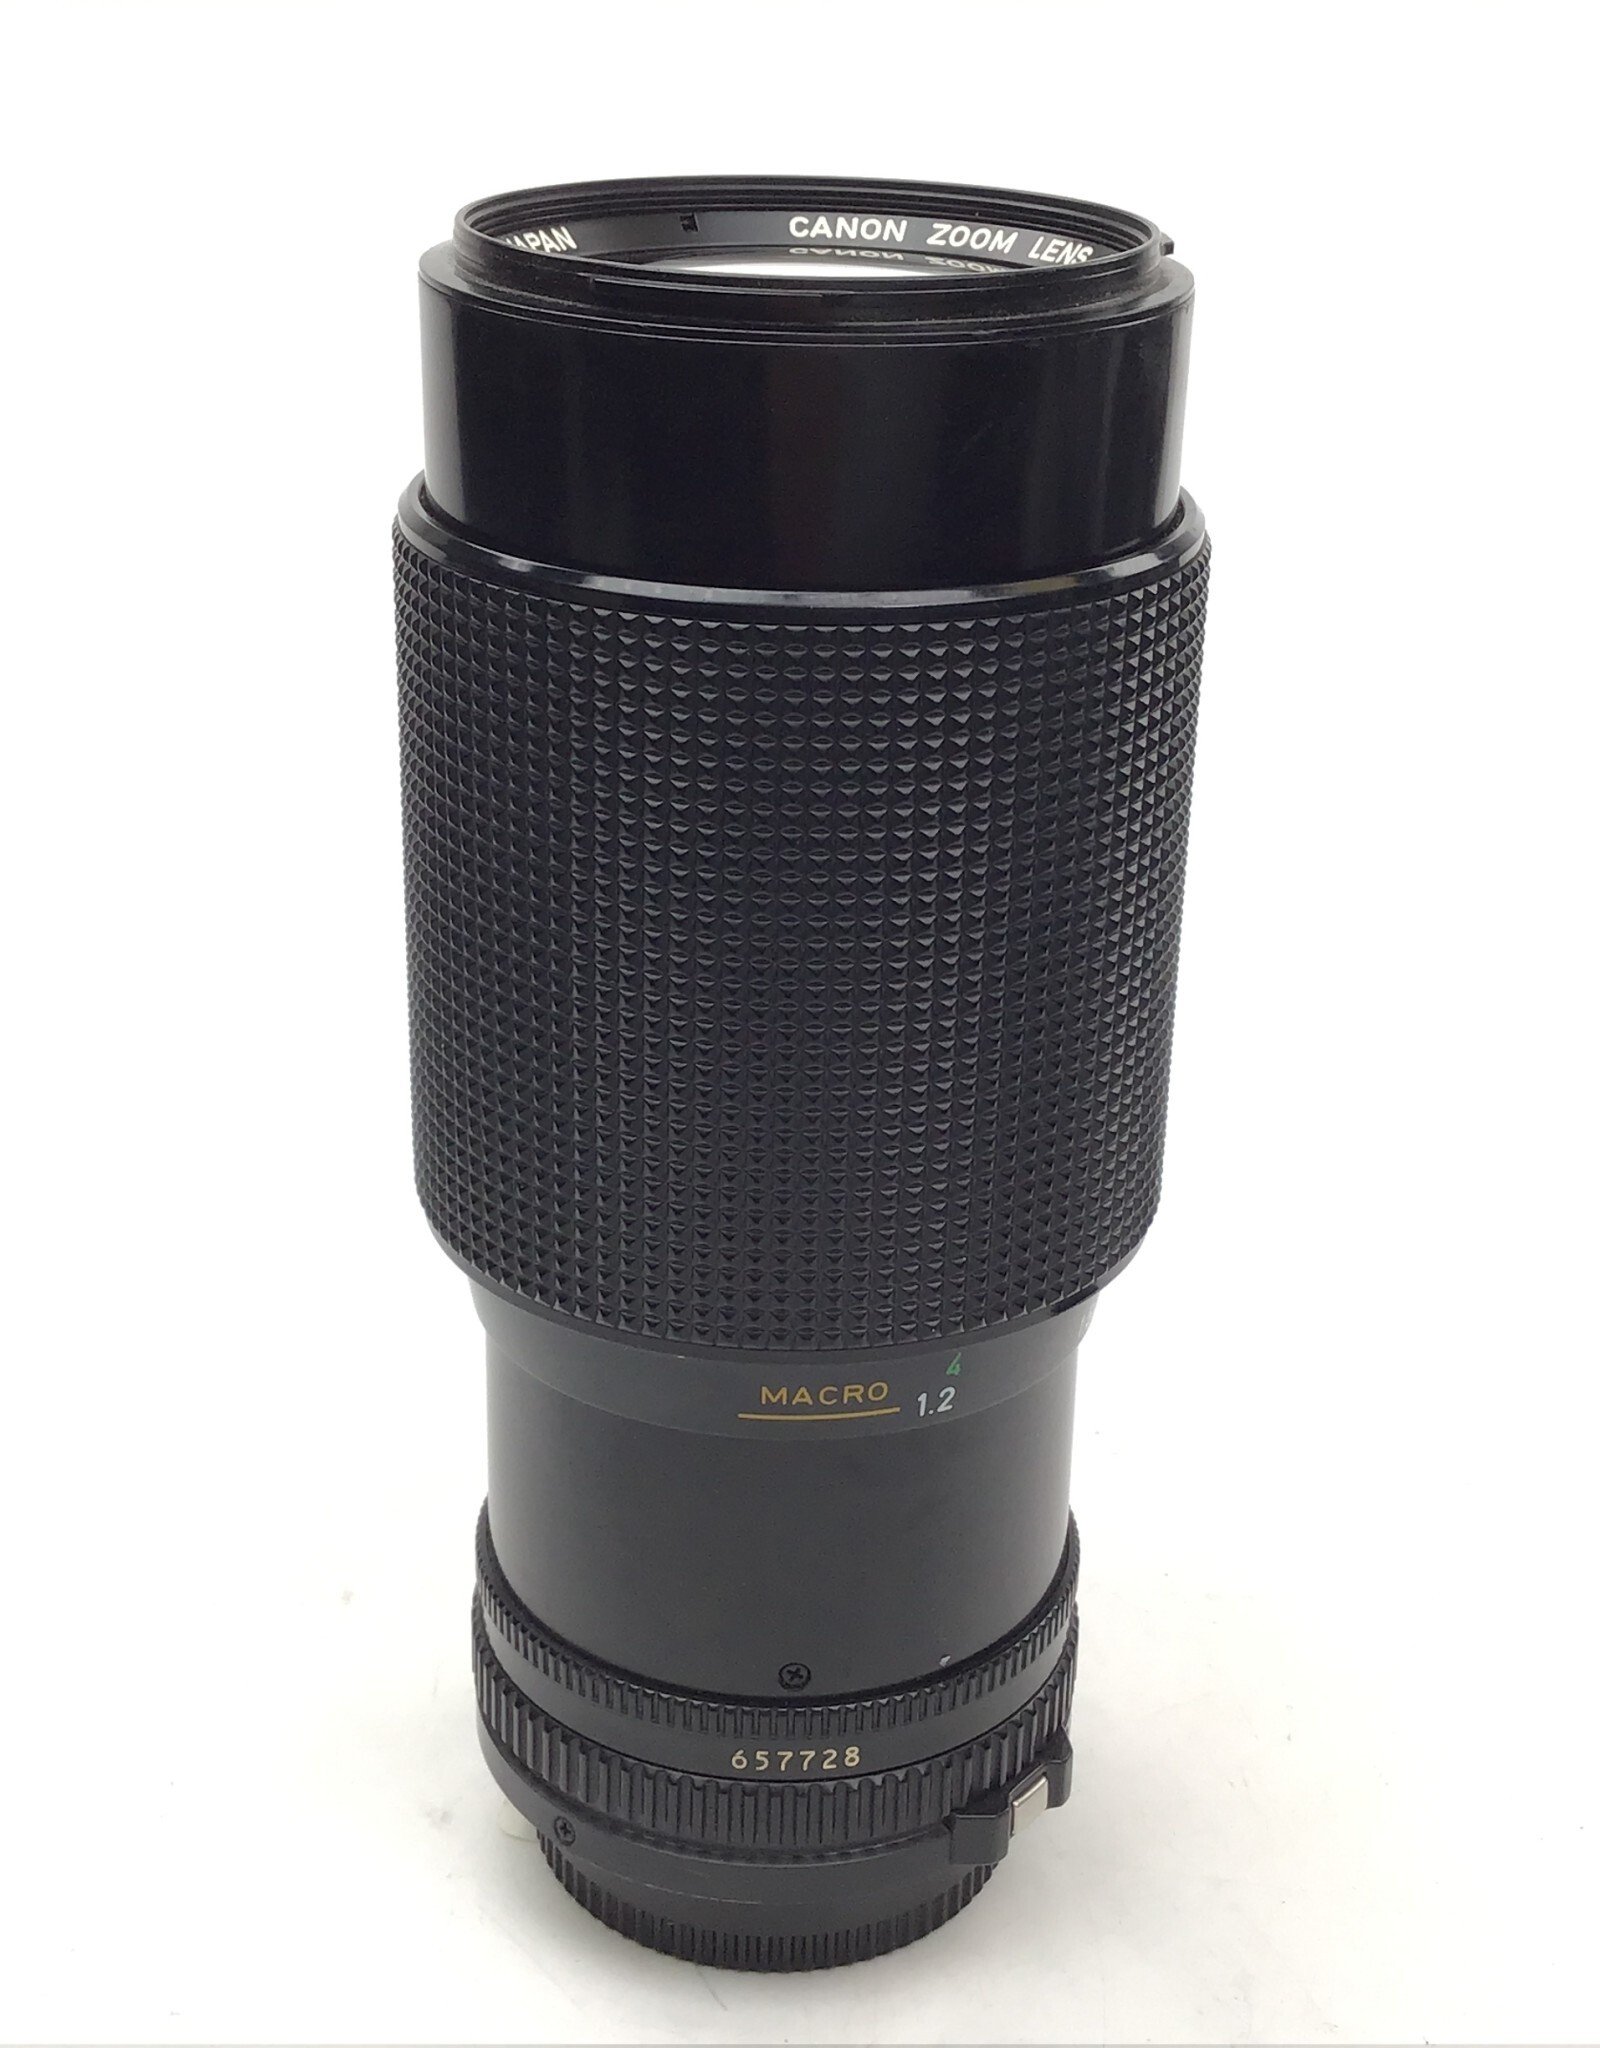 CANON Canon FD 70-210mm f4 Lens Used Good